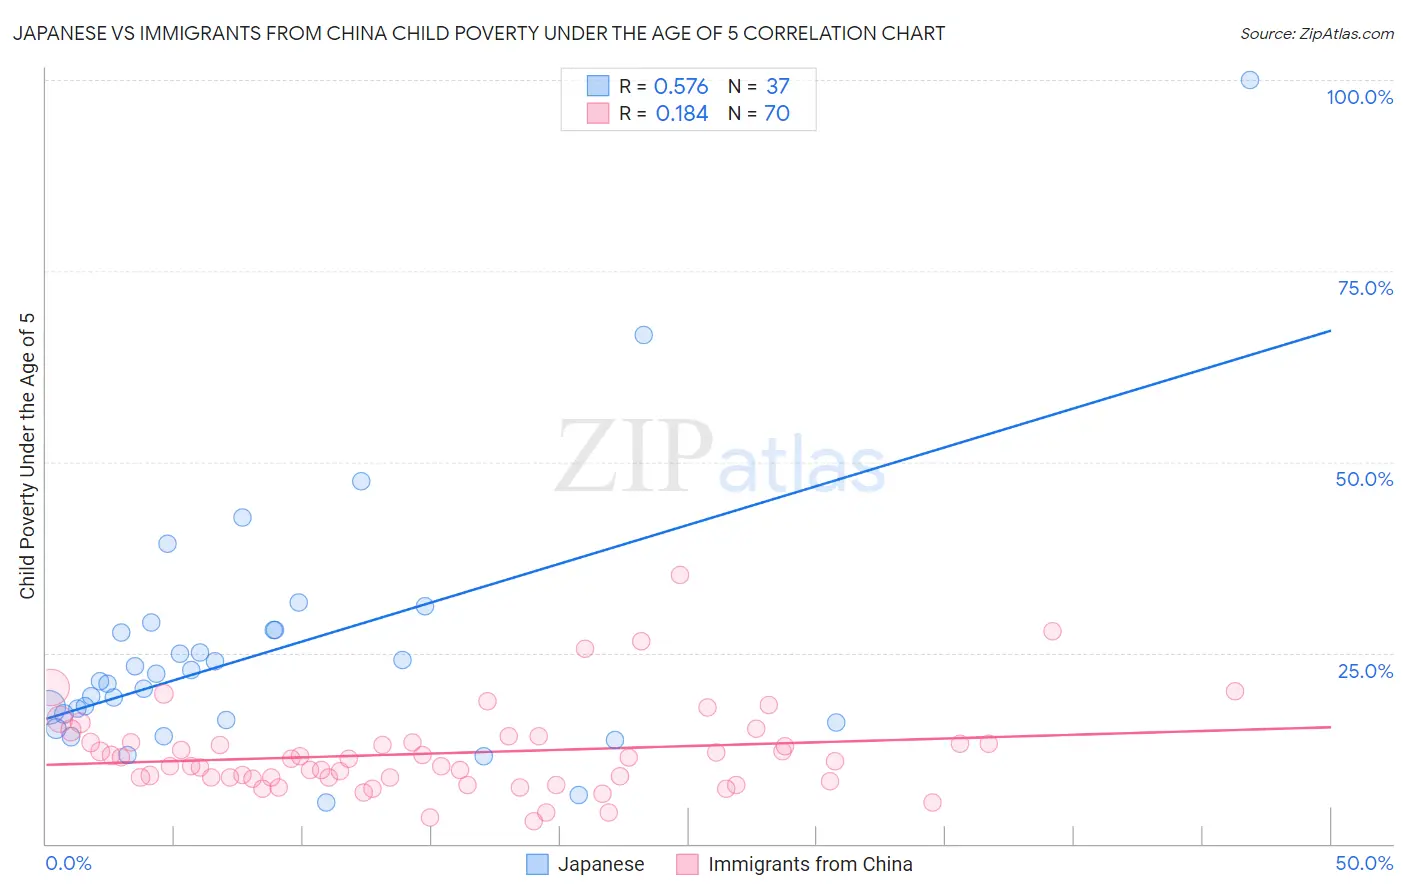 Japanese vs Immigrants from China Child Poverty Under the Age of 5